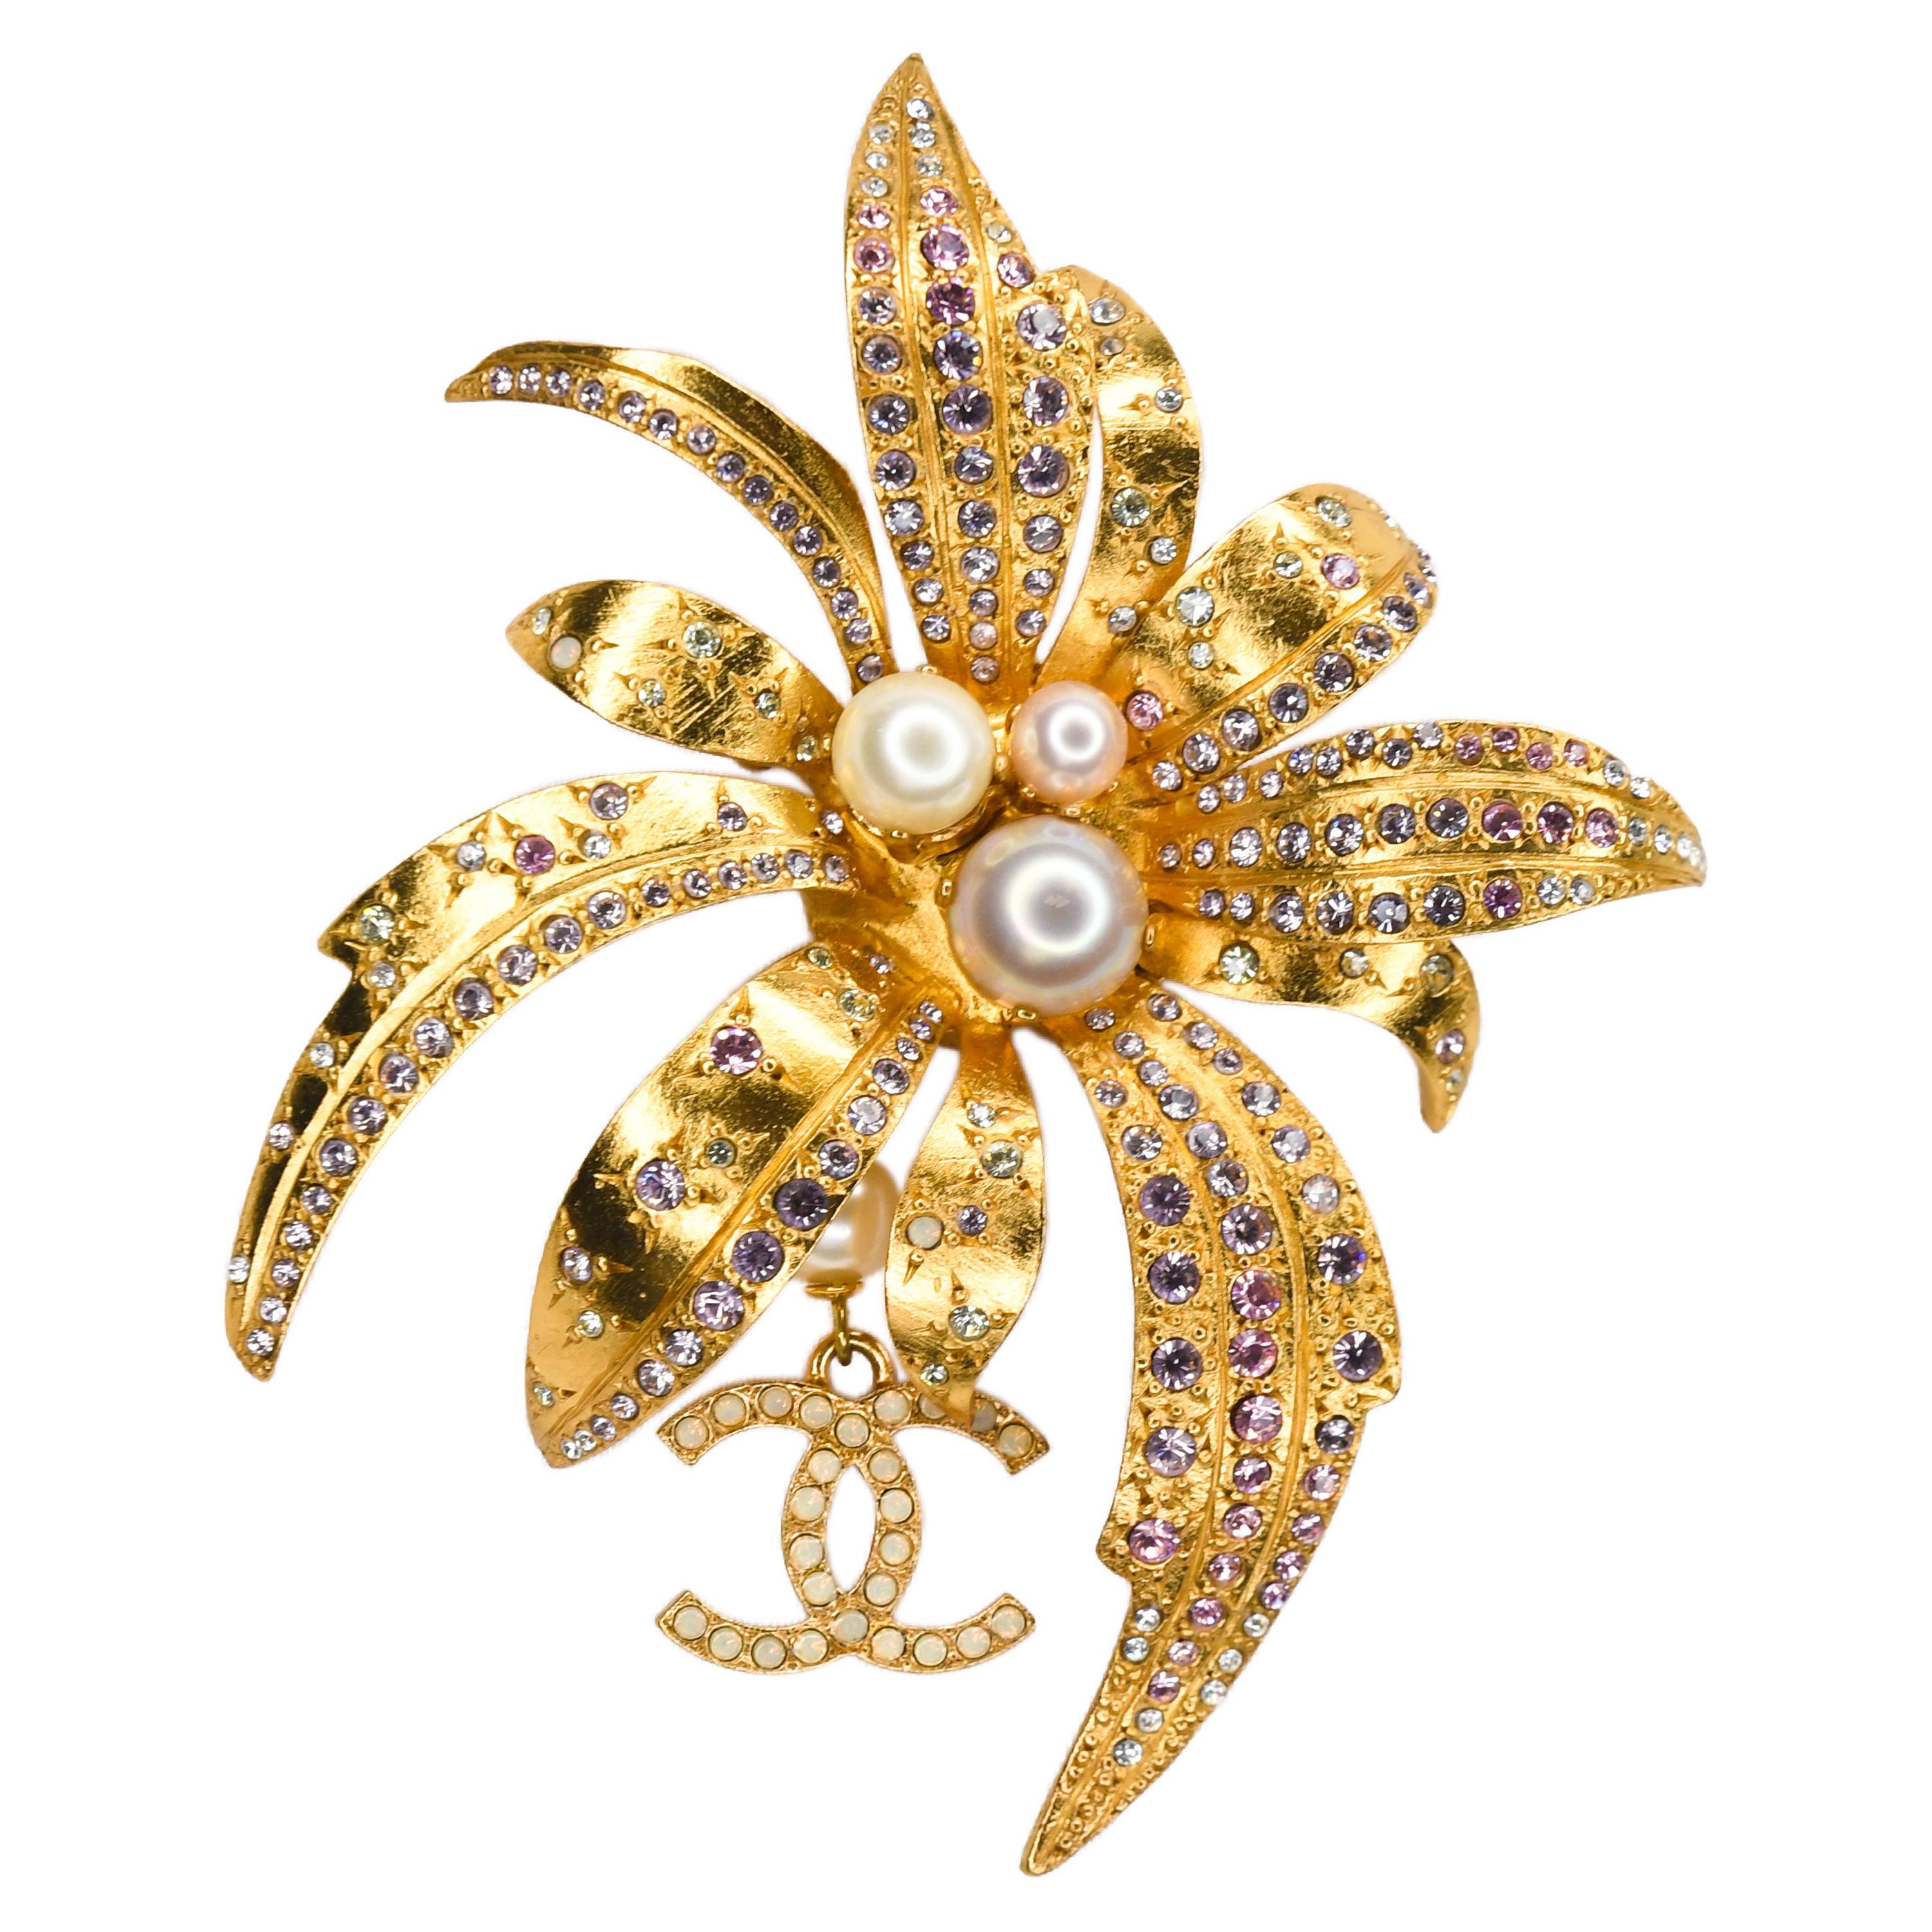 Chanel Stylized Gold Tone Flower Brooch, CC Logo, Pearls and Gripoix Stones 2002